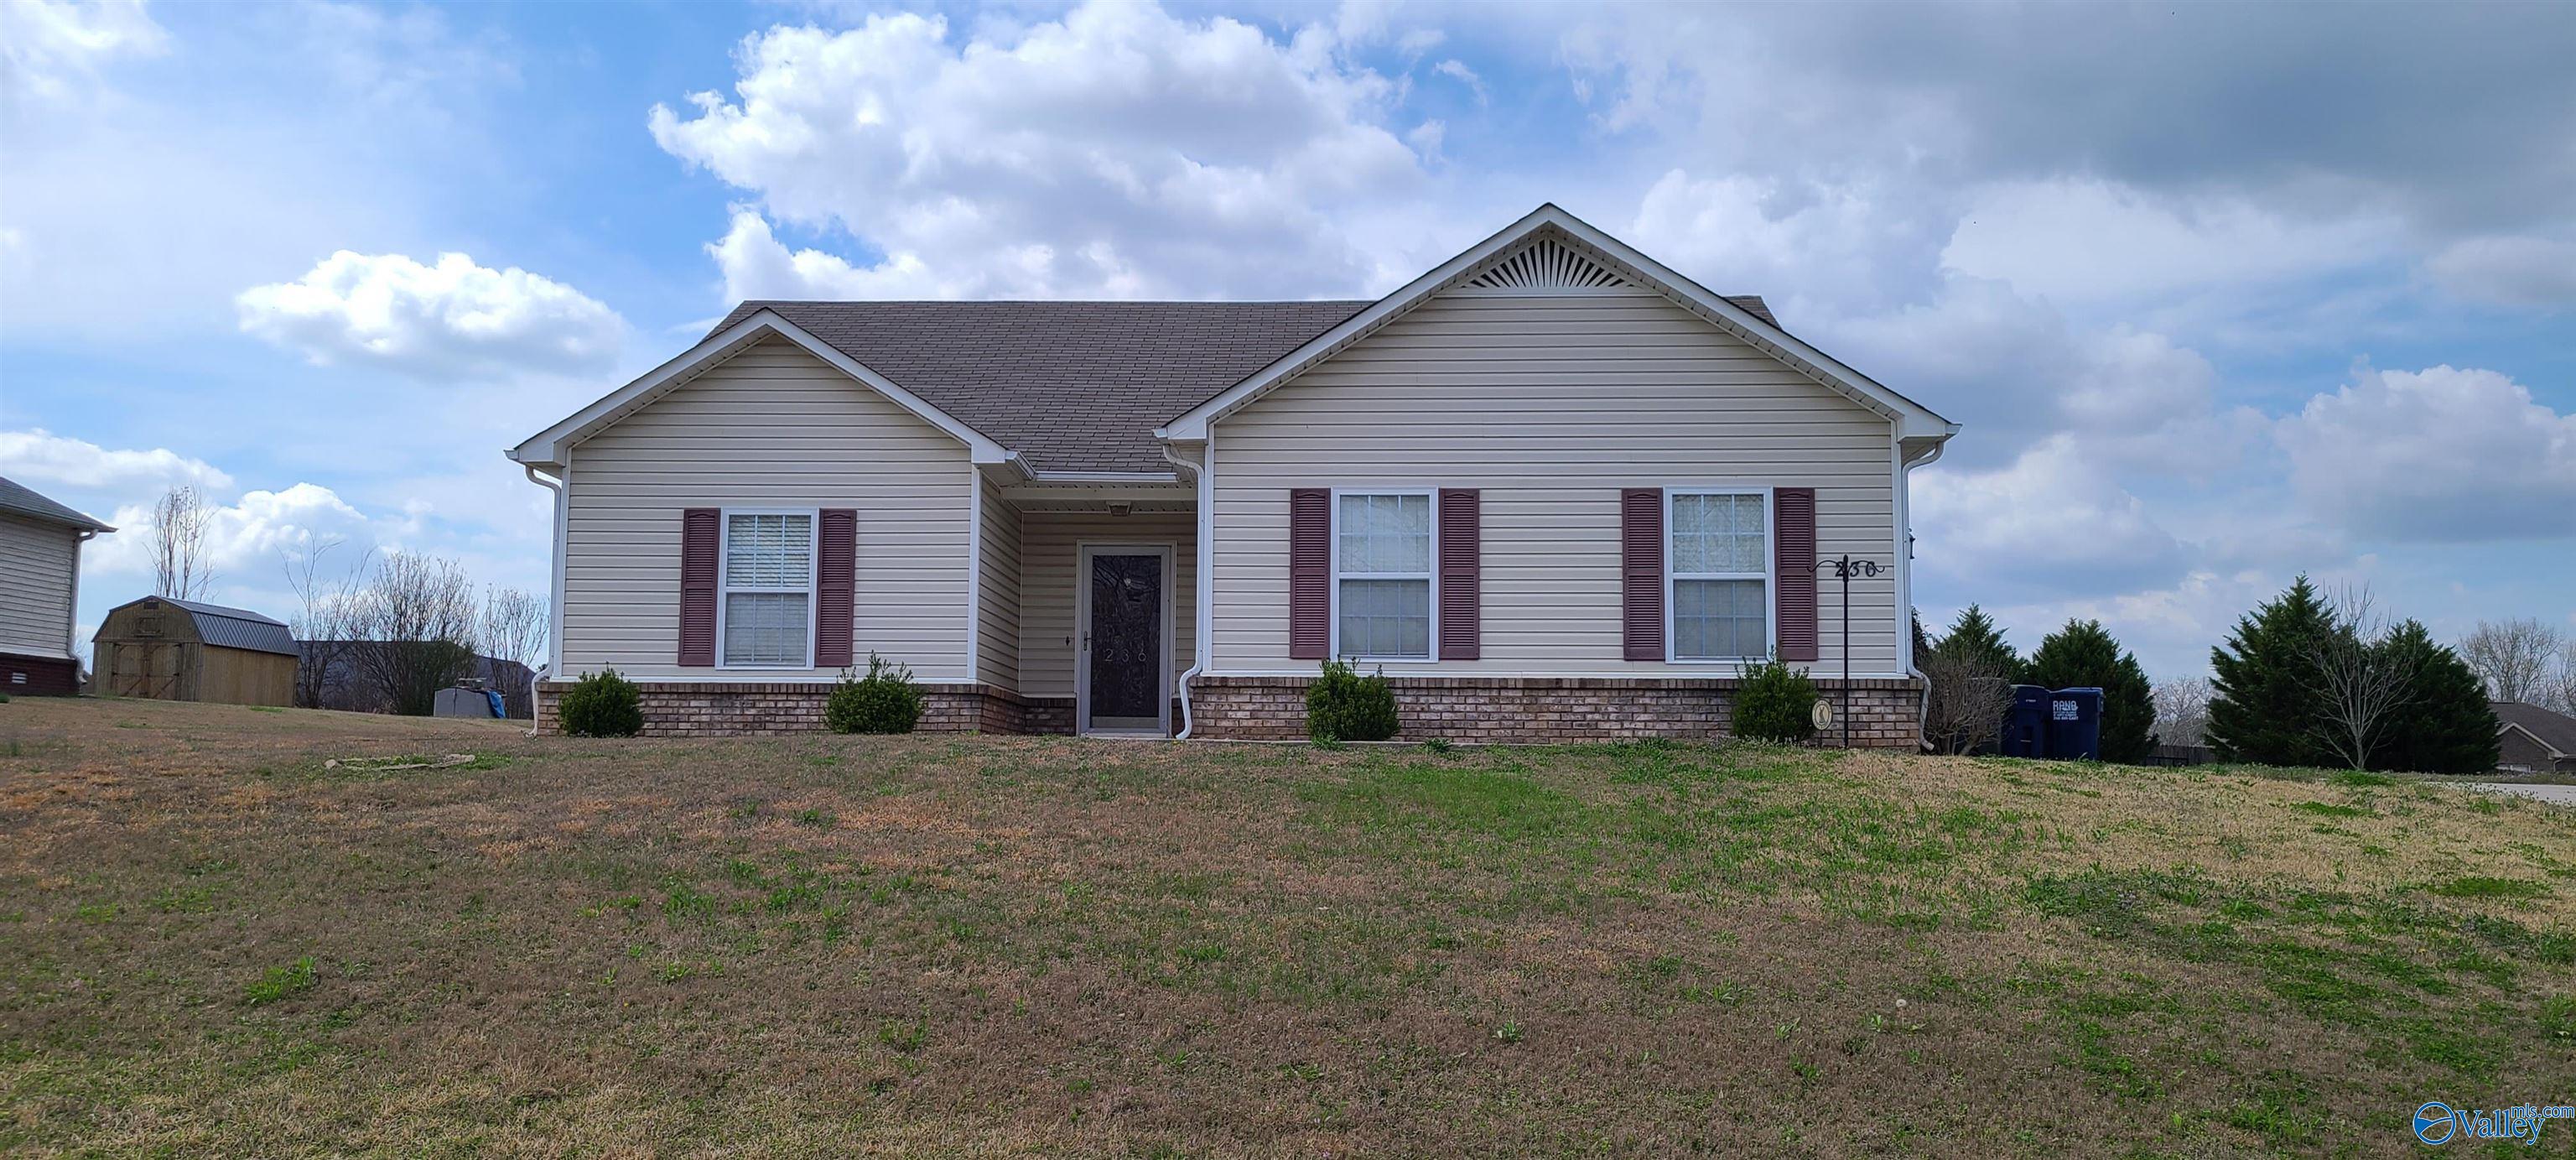 Property: 236 Tanner Point Drive,New Market, AL